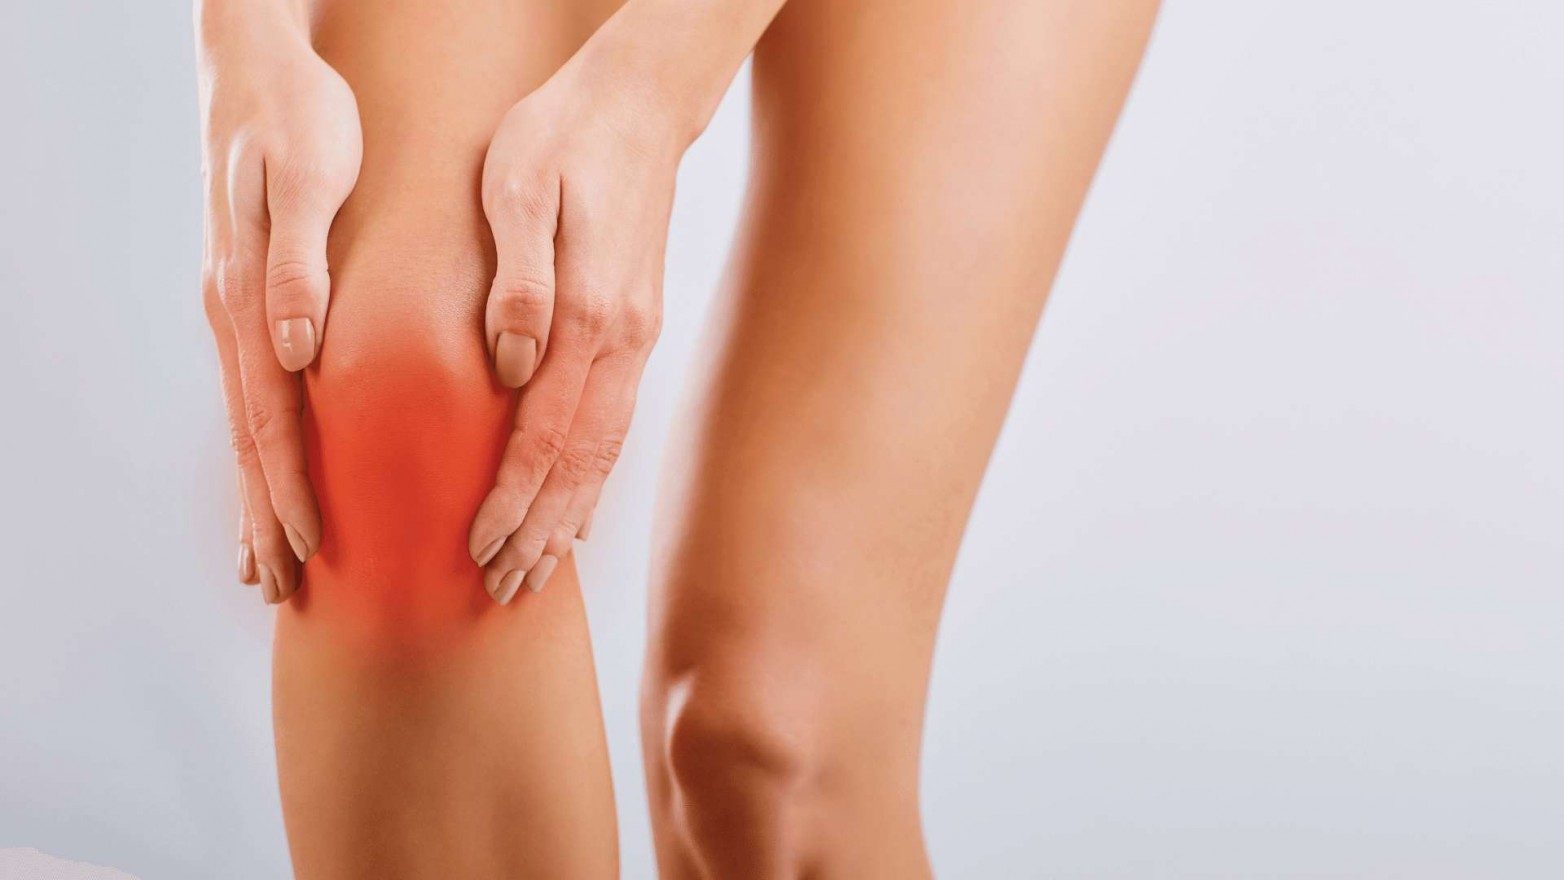 Pain and symptoms felt in the front of the knee from bursitis